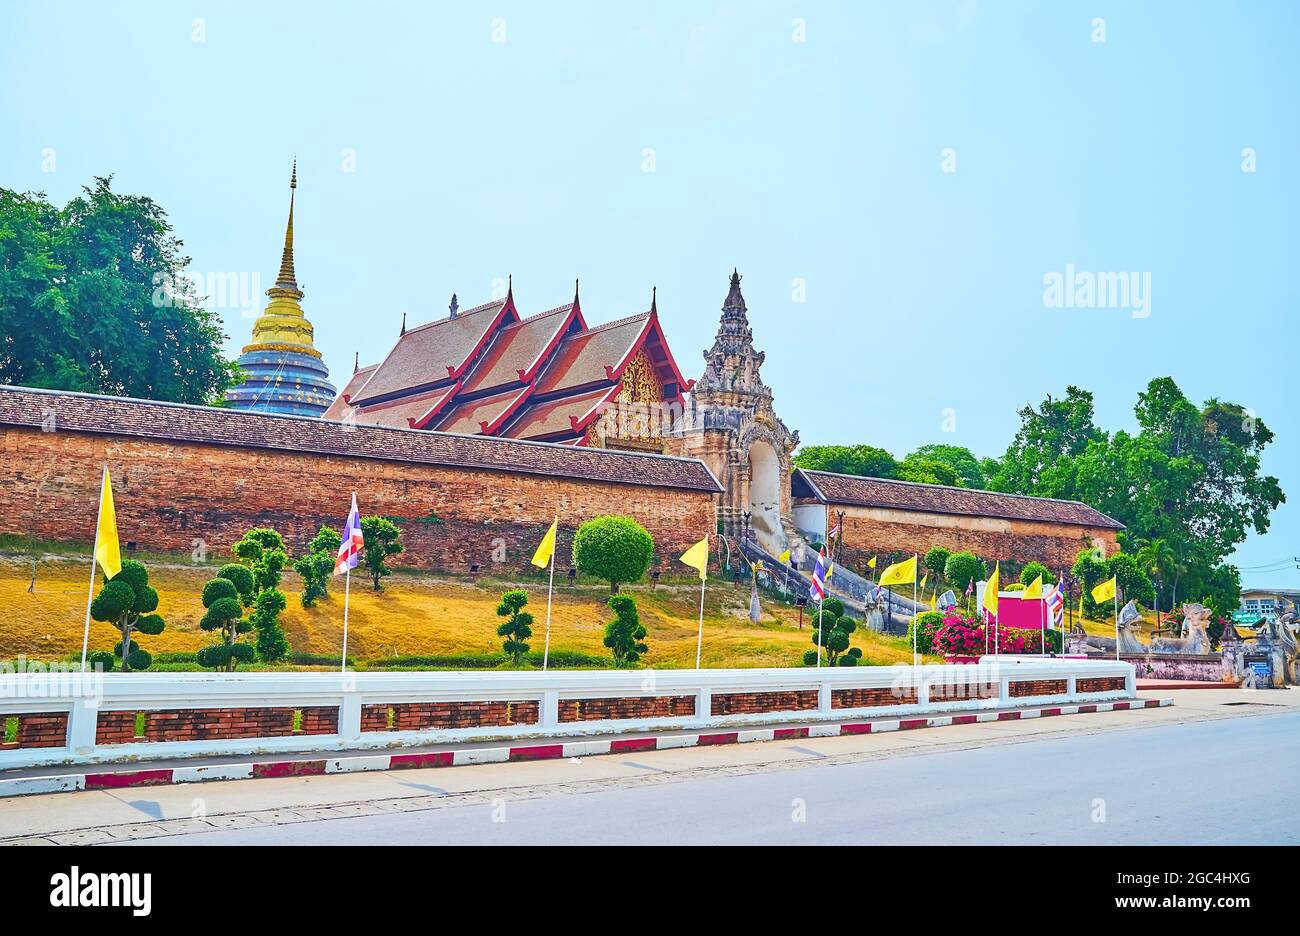 The rampart, pyathat roof and Chedi's spire of Wat Phra That Lampang Luang Temple, Lampang, Thailand Stock Photo